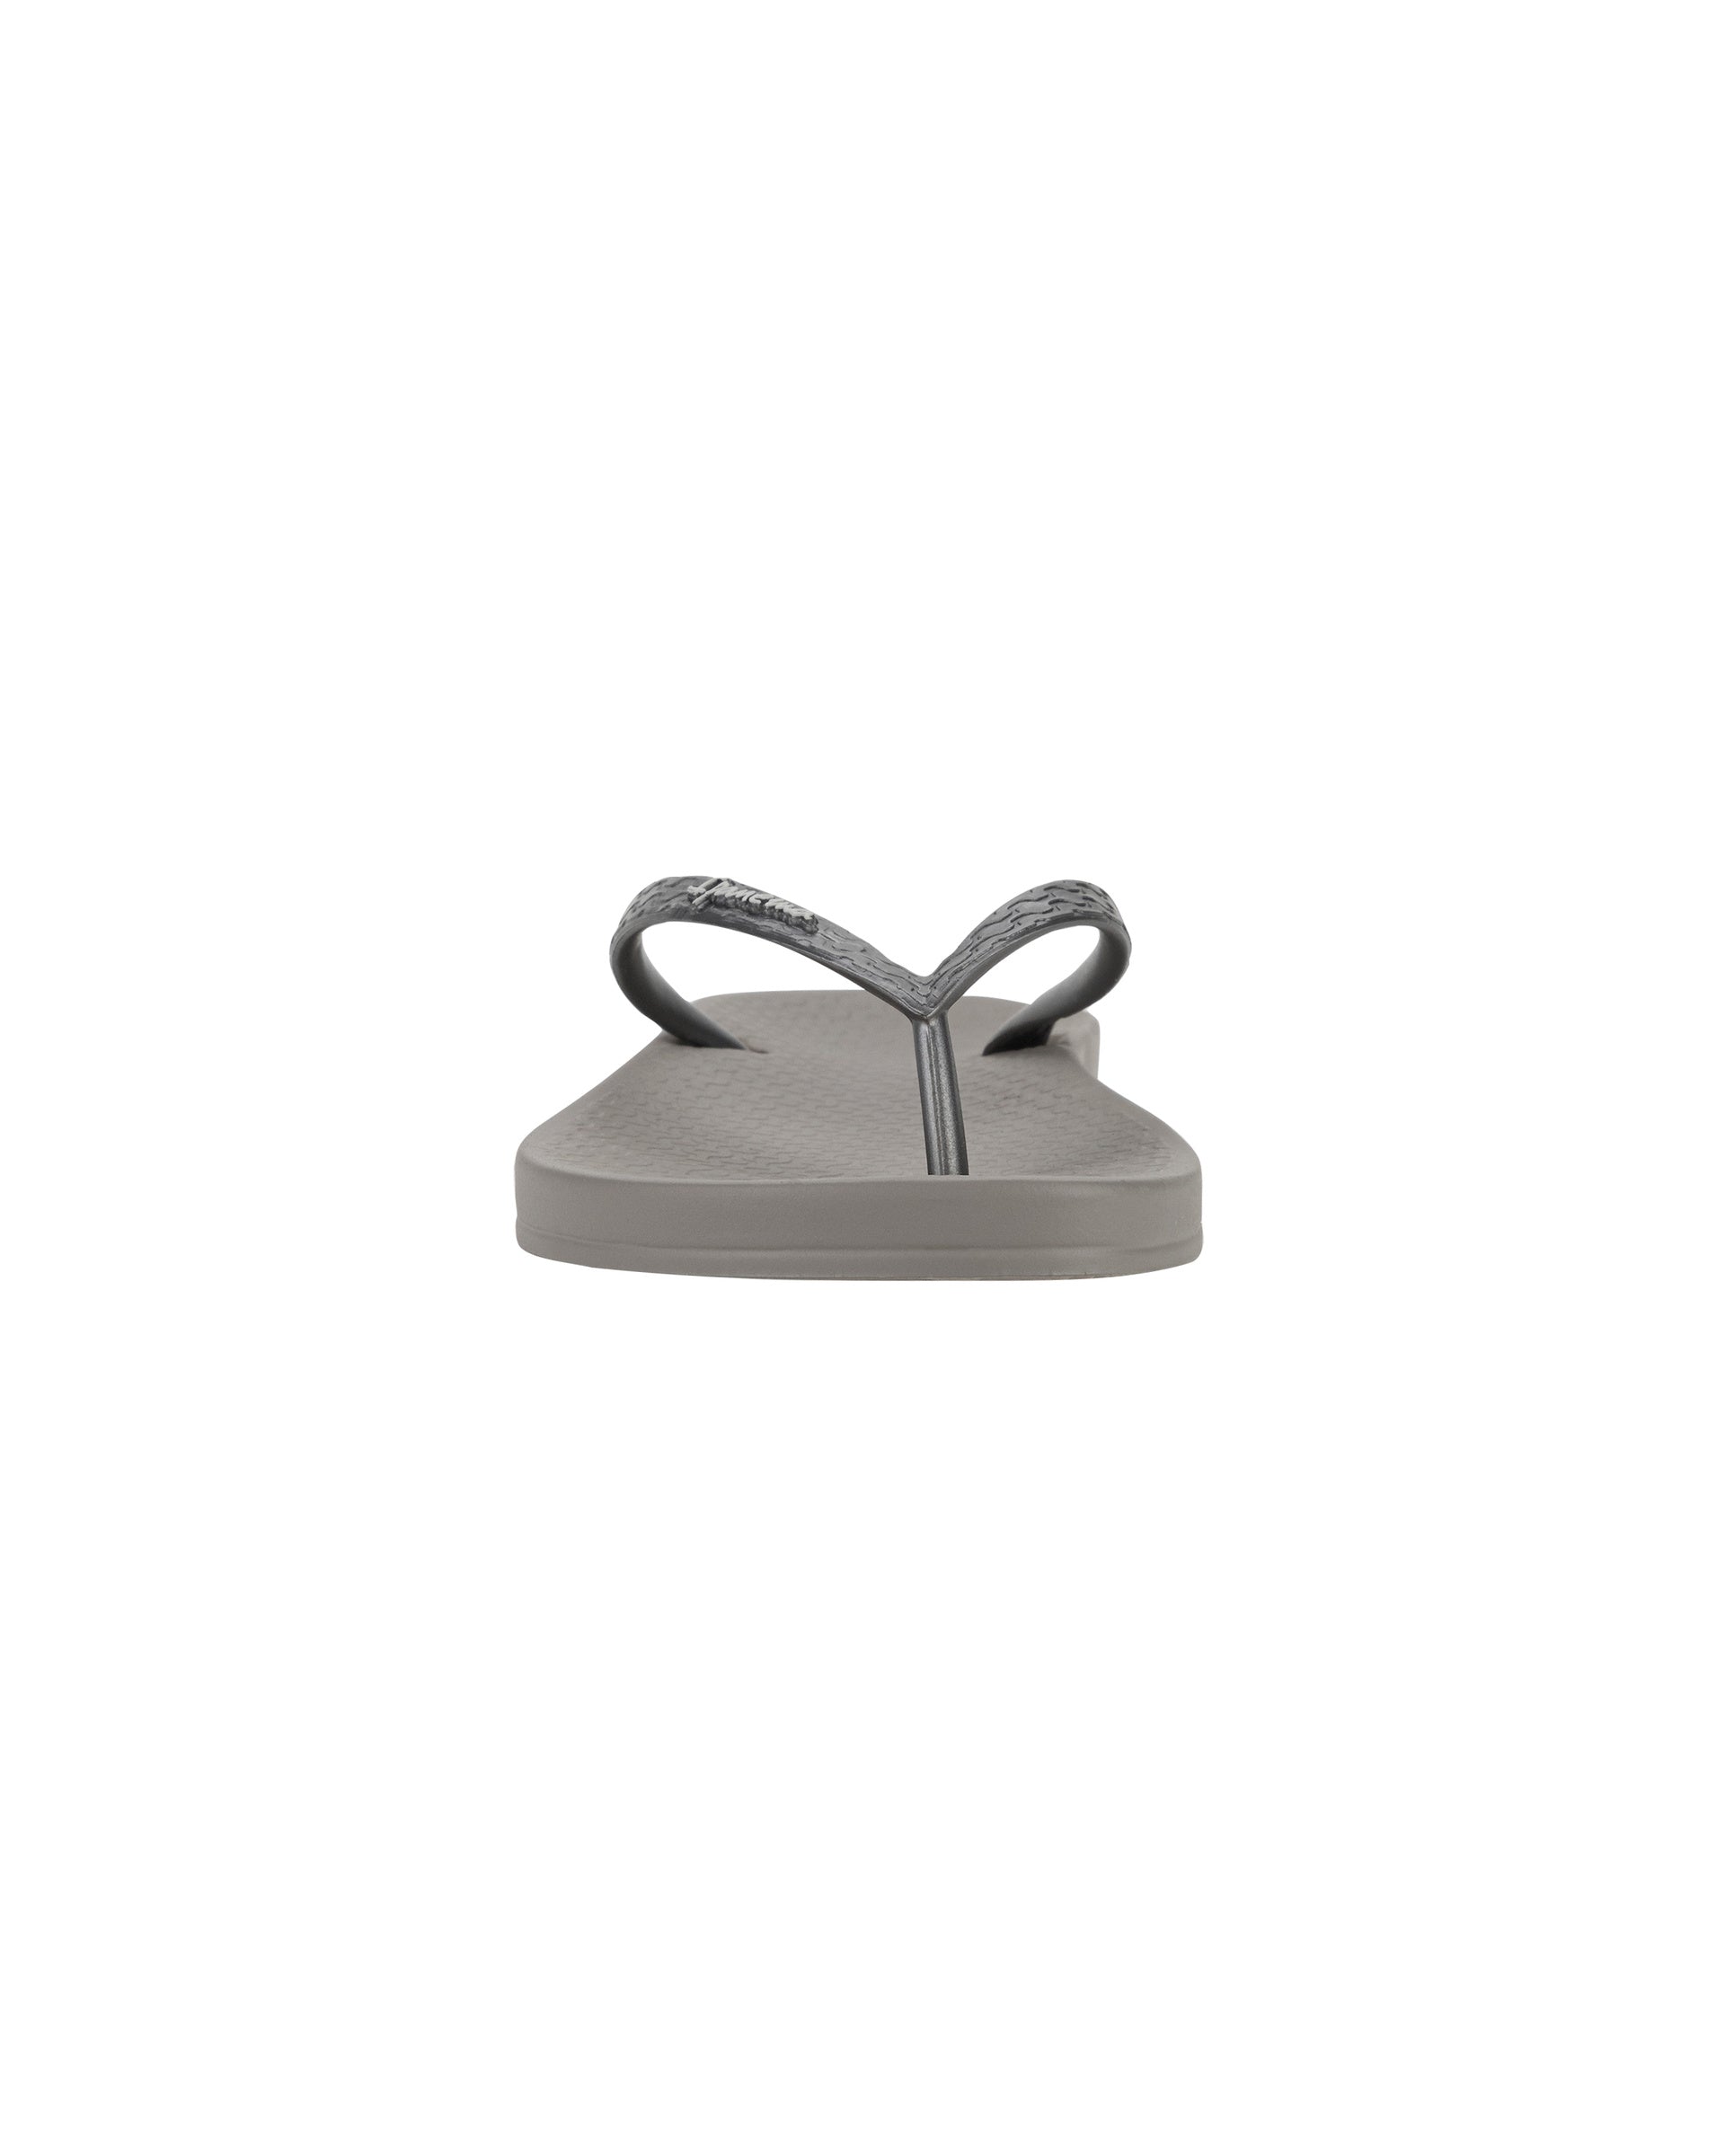 Front view of a grey Ipanema Ana Tan women's flip flop.